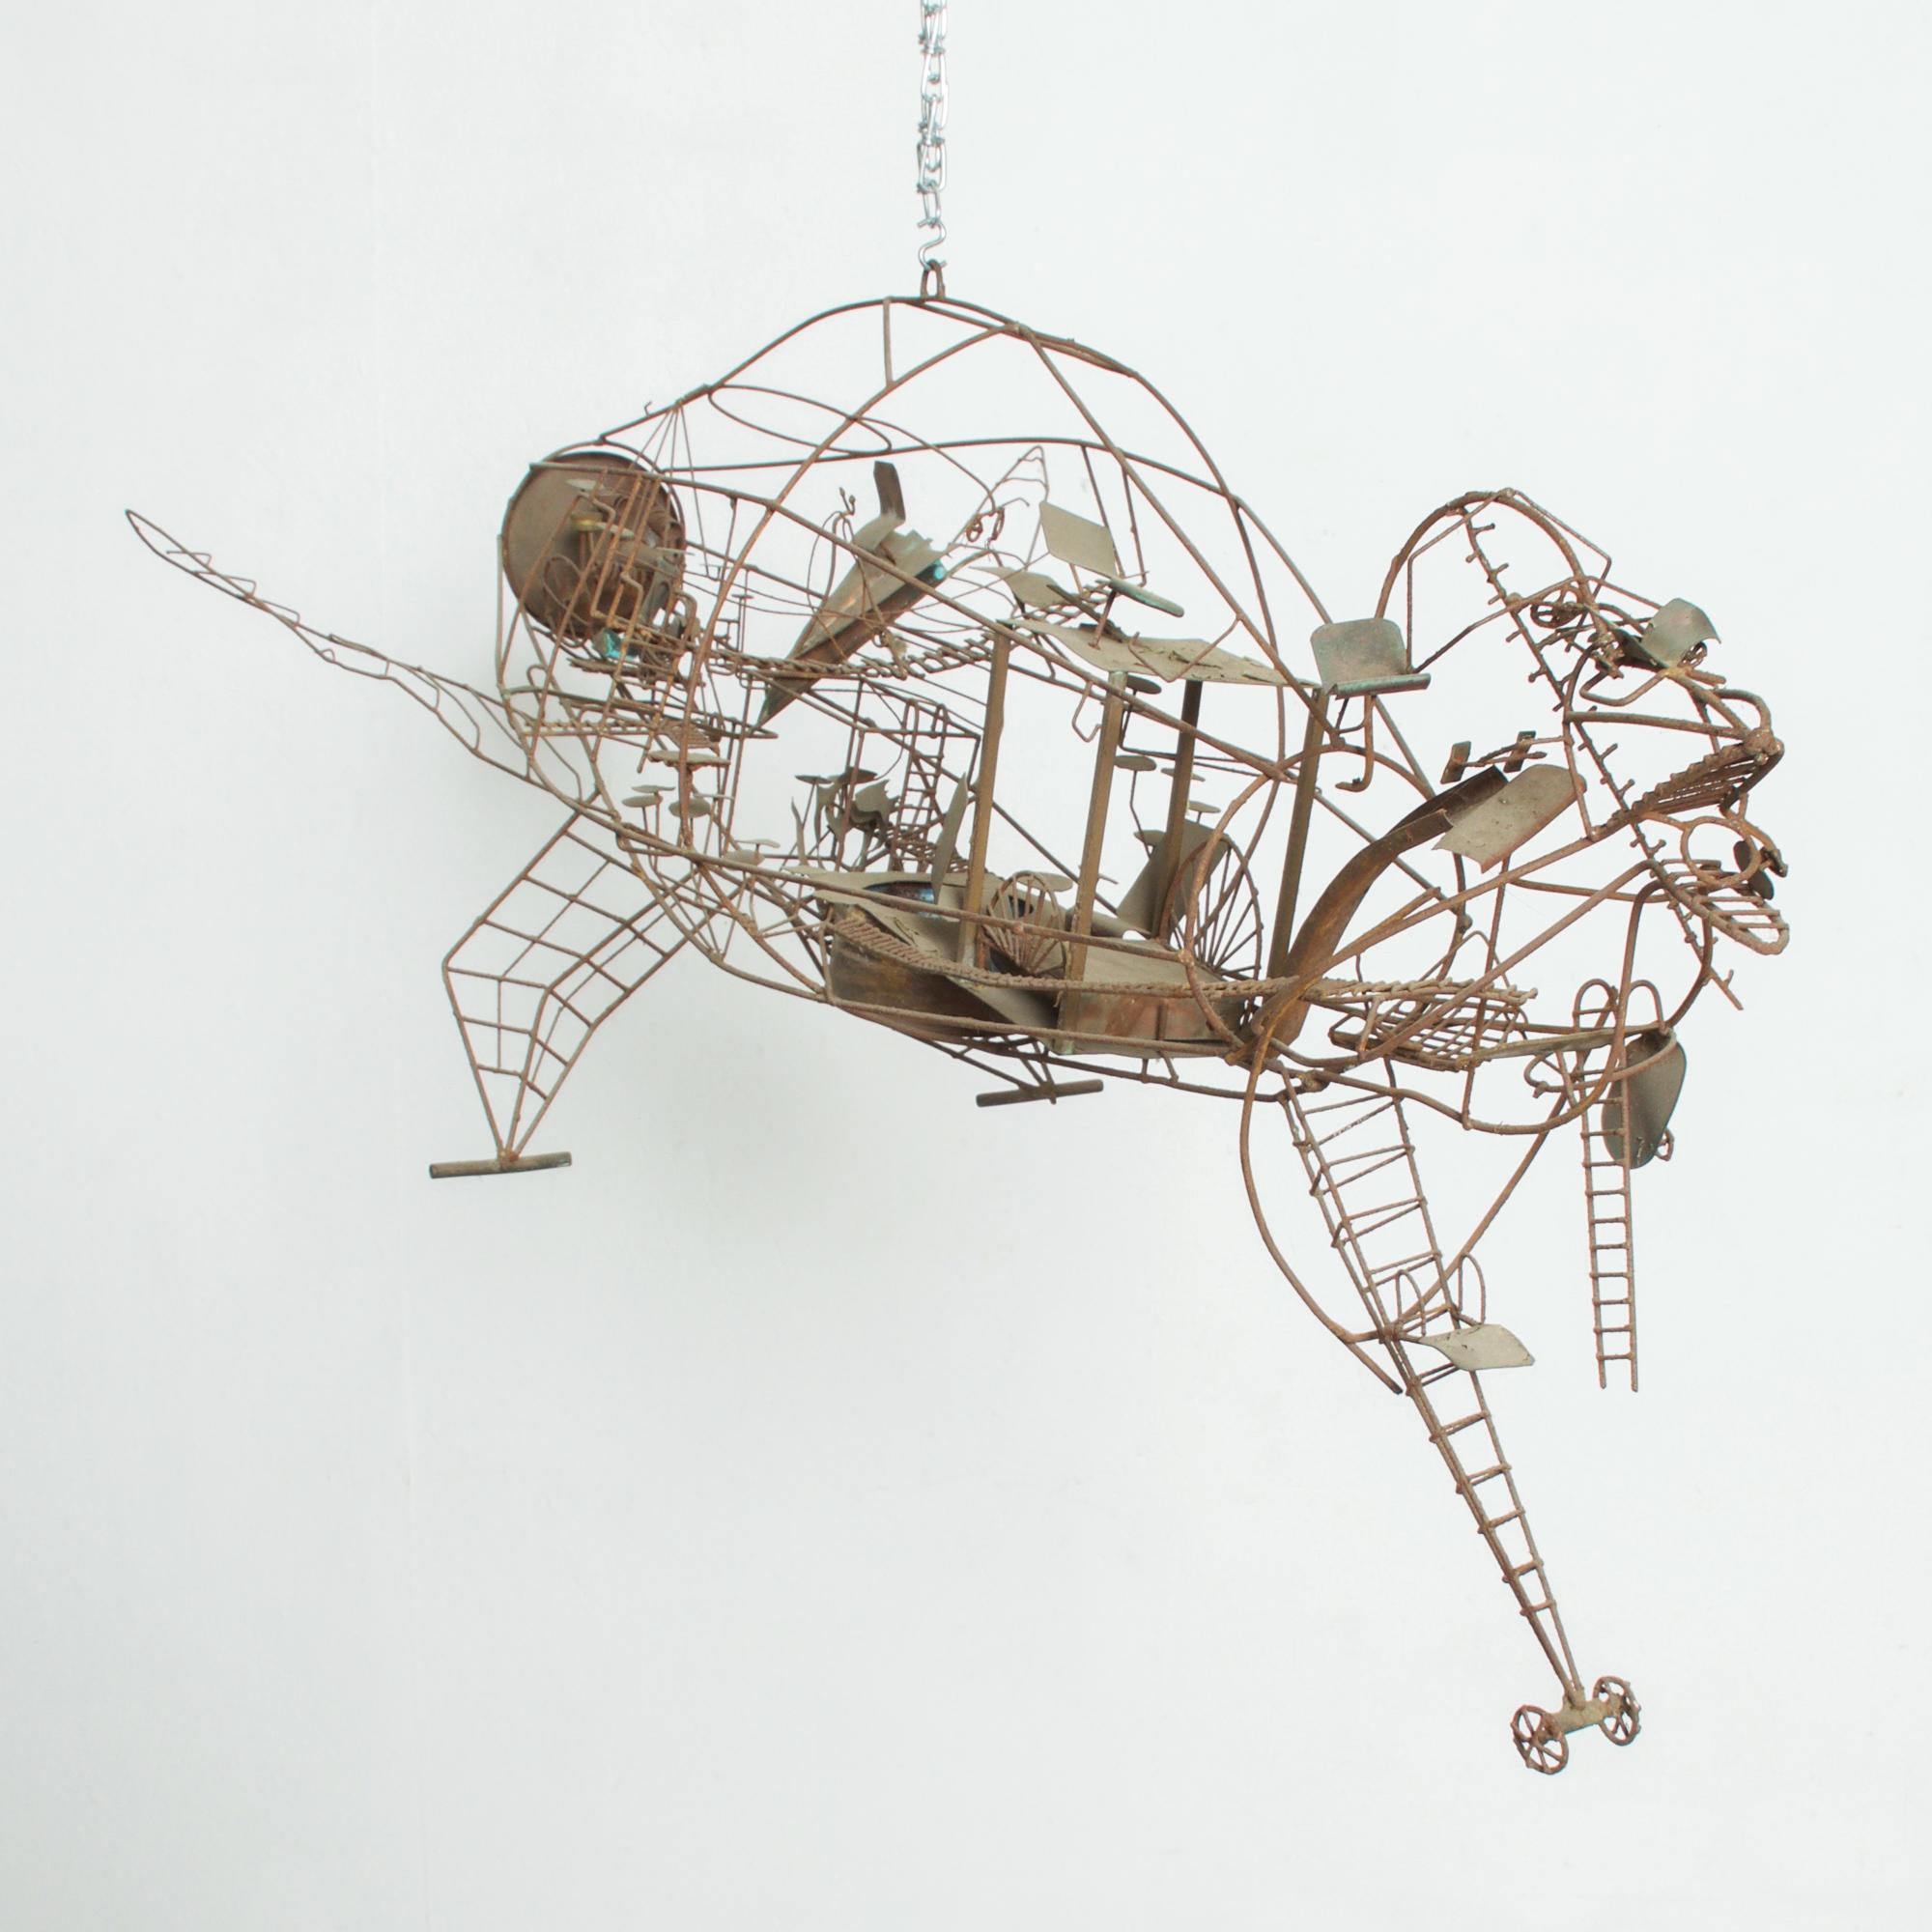 Aviation Sculpture in Wire
1960s Detailed Abstract Wire Art Kinetic Hanging Metal Sculpture in the manner and style of C Jere and
Raymor Studios.
Unmarked.
Measures: 48W x 18 H x 22 D
Unrestored preowned Vintage Item Condition. Rust is present. Some